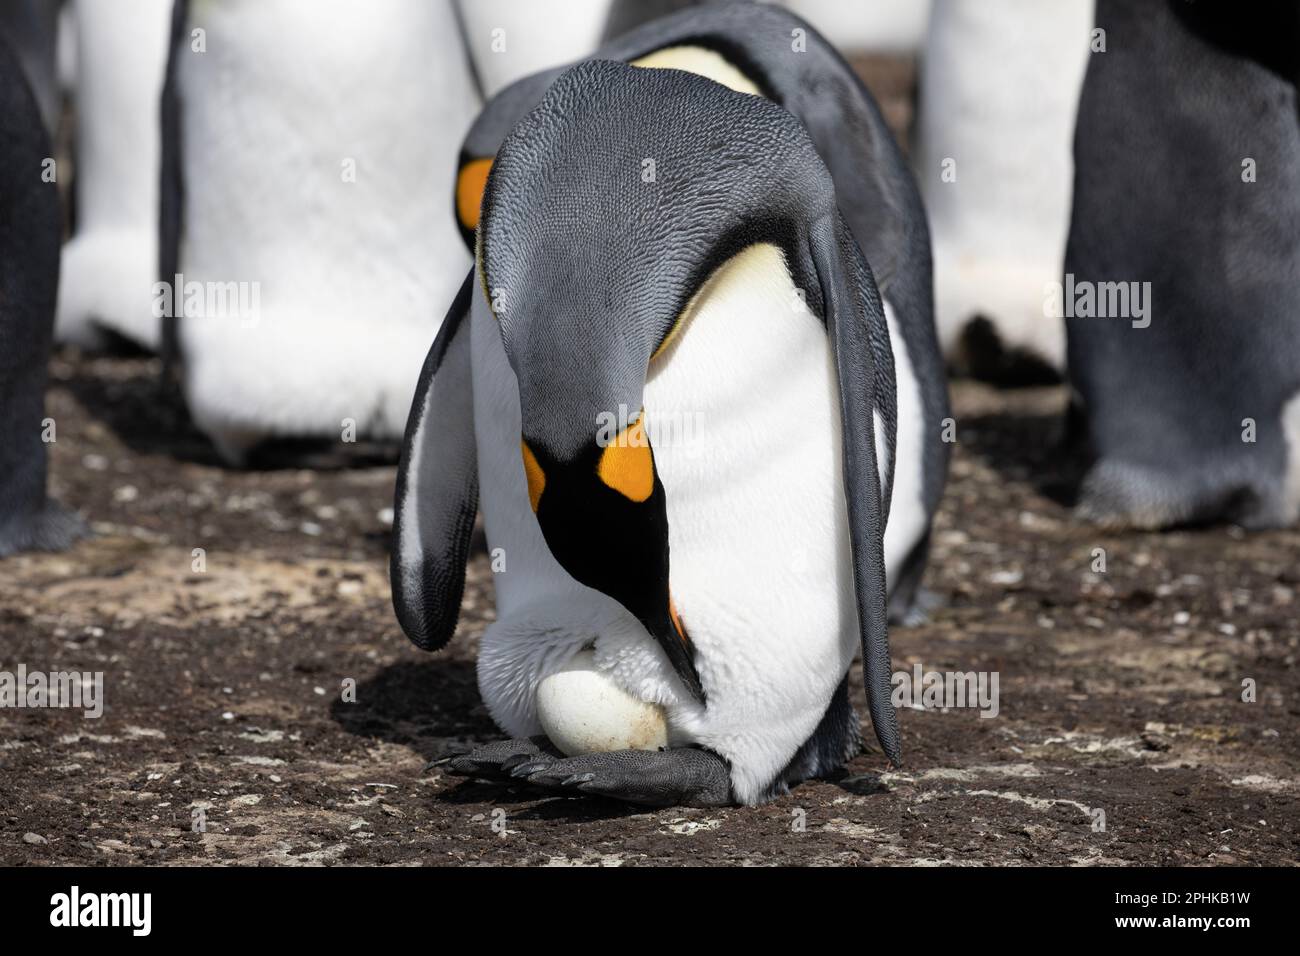 King Penquin, Aptenodytes Patagonicus, carrying its egg in its feet, at Volunteer Point in The Falkland Islands. Stock Photo